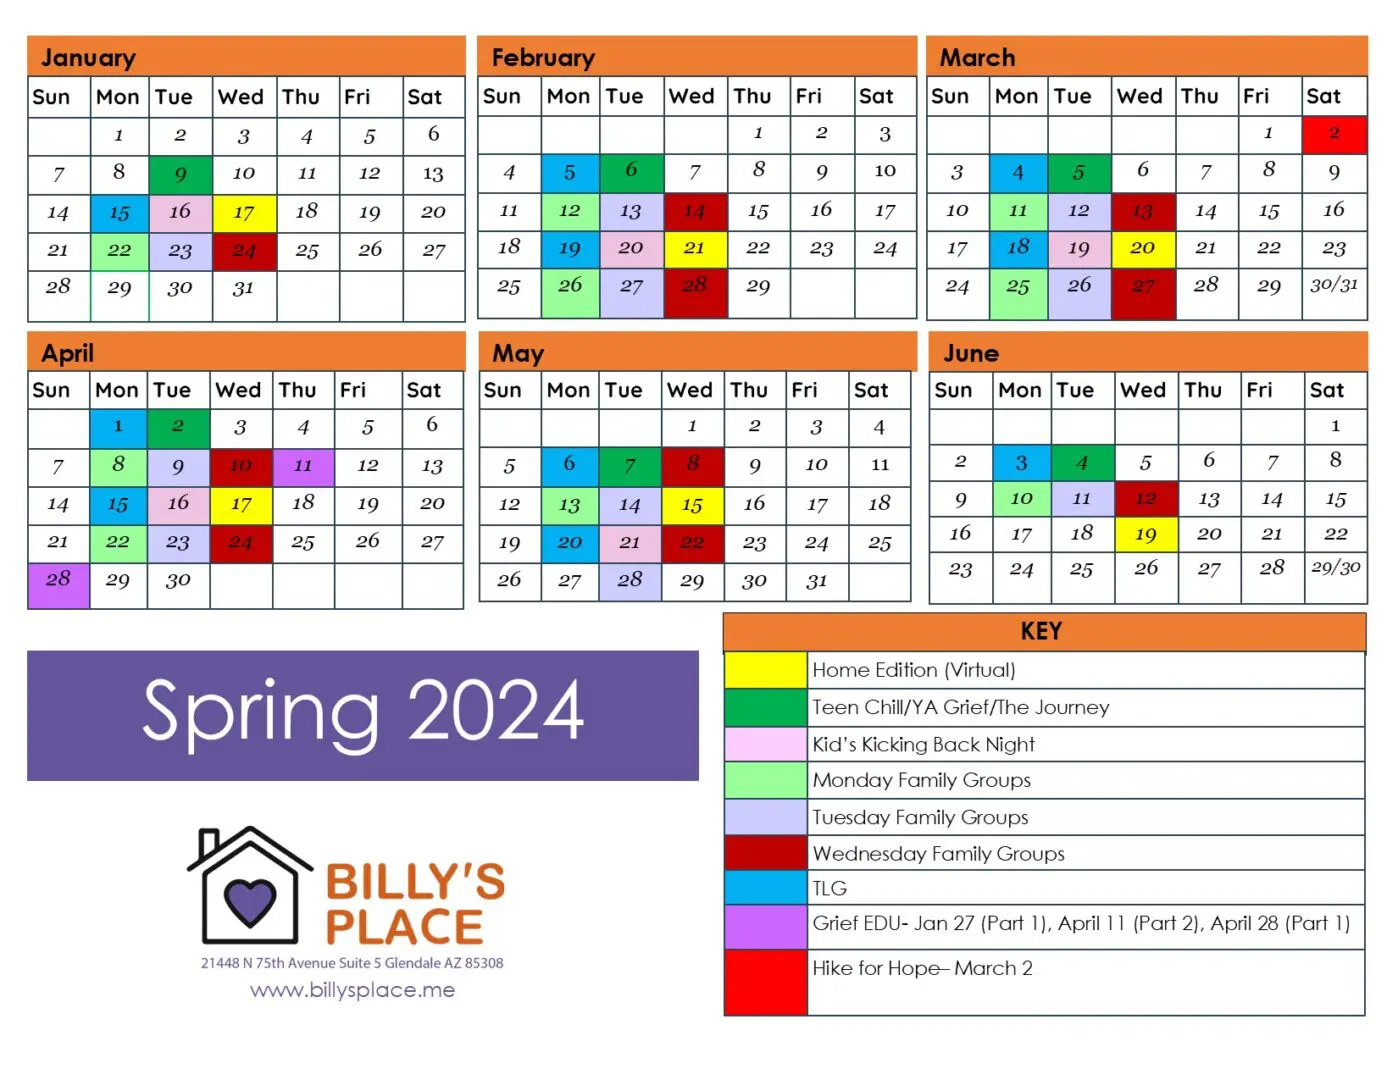 A colorful 2024 calendar labeled "spring 2024" with weekly events marked in various colors and a key at the bottom explaining the color coding, situated above a logo for "billy's palace.